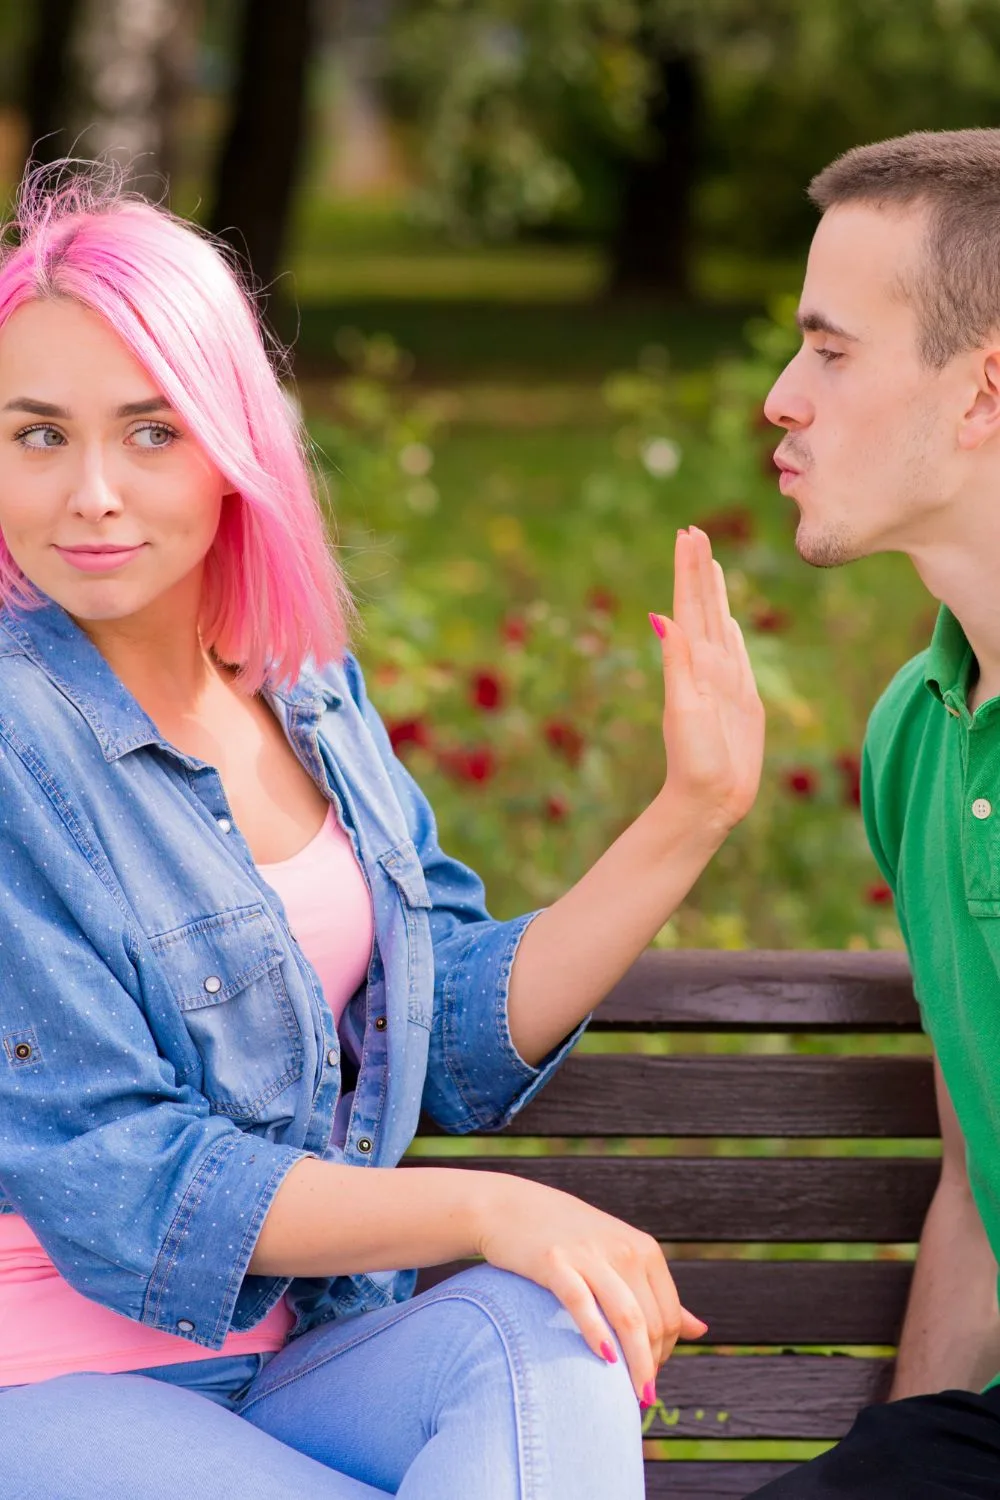 How to deal with a guy playing mind games